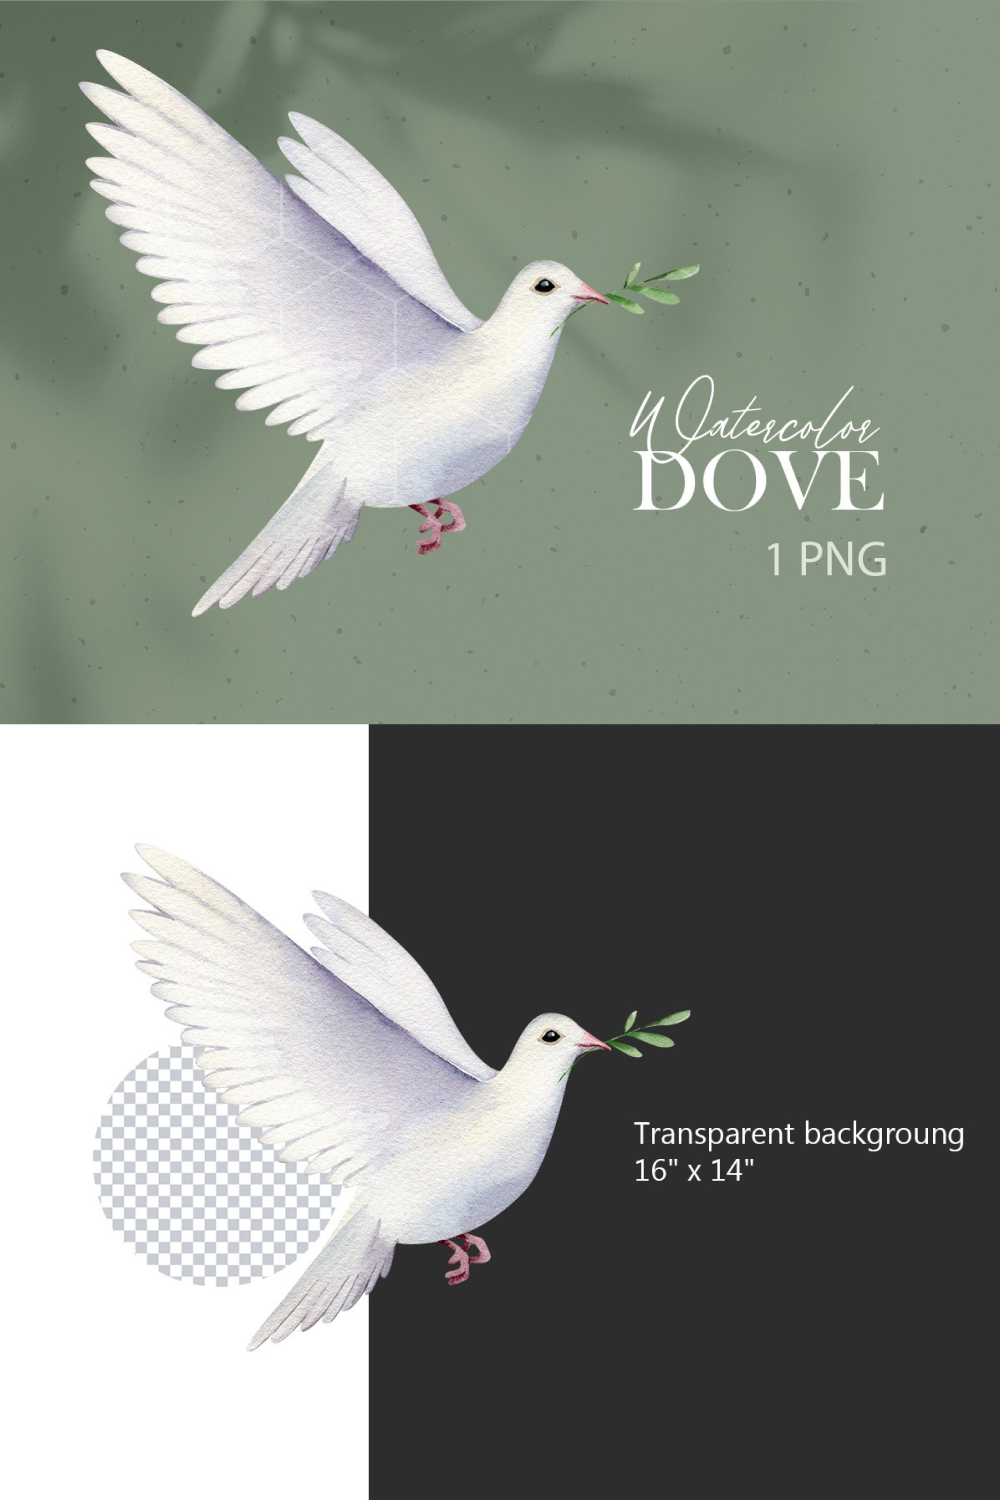 Watercolor dove clipart png flying bird clipart pigeon of pinterest.